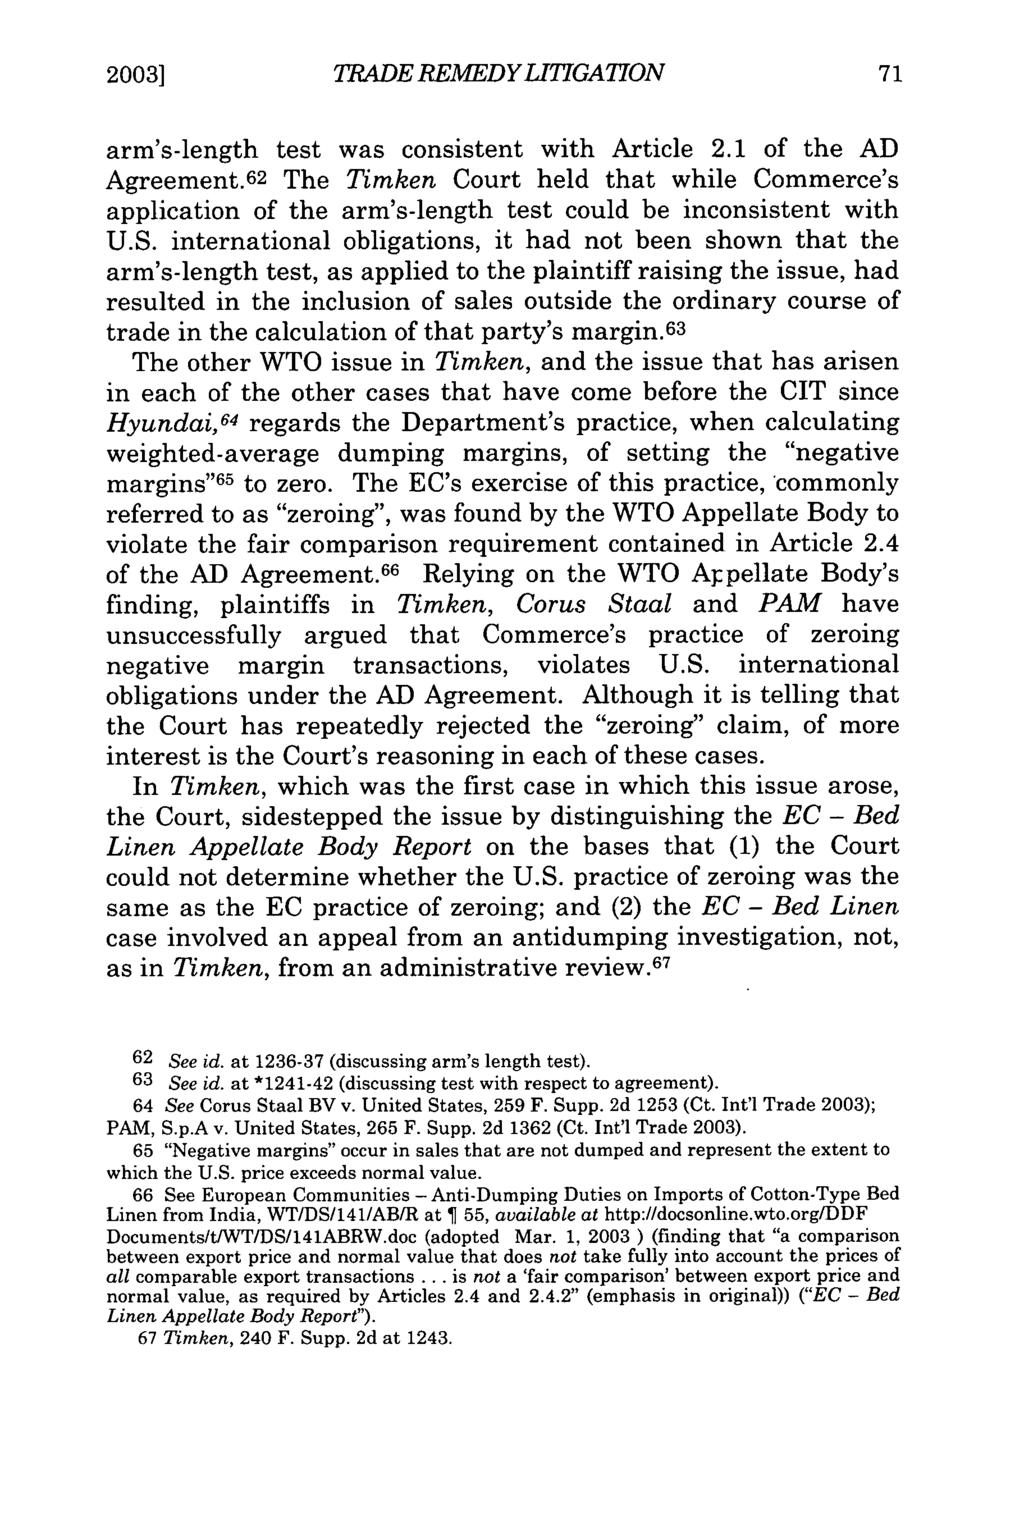 20031 TRADE REMEDY LITIGATION arm's-length test was consistent with Article 2.1 of the AD Agreement.